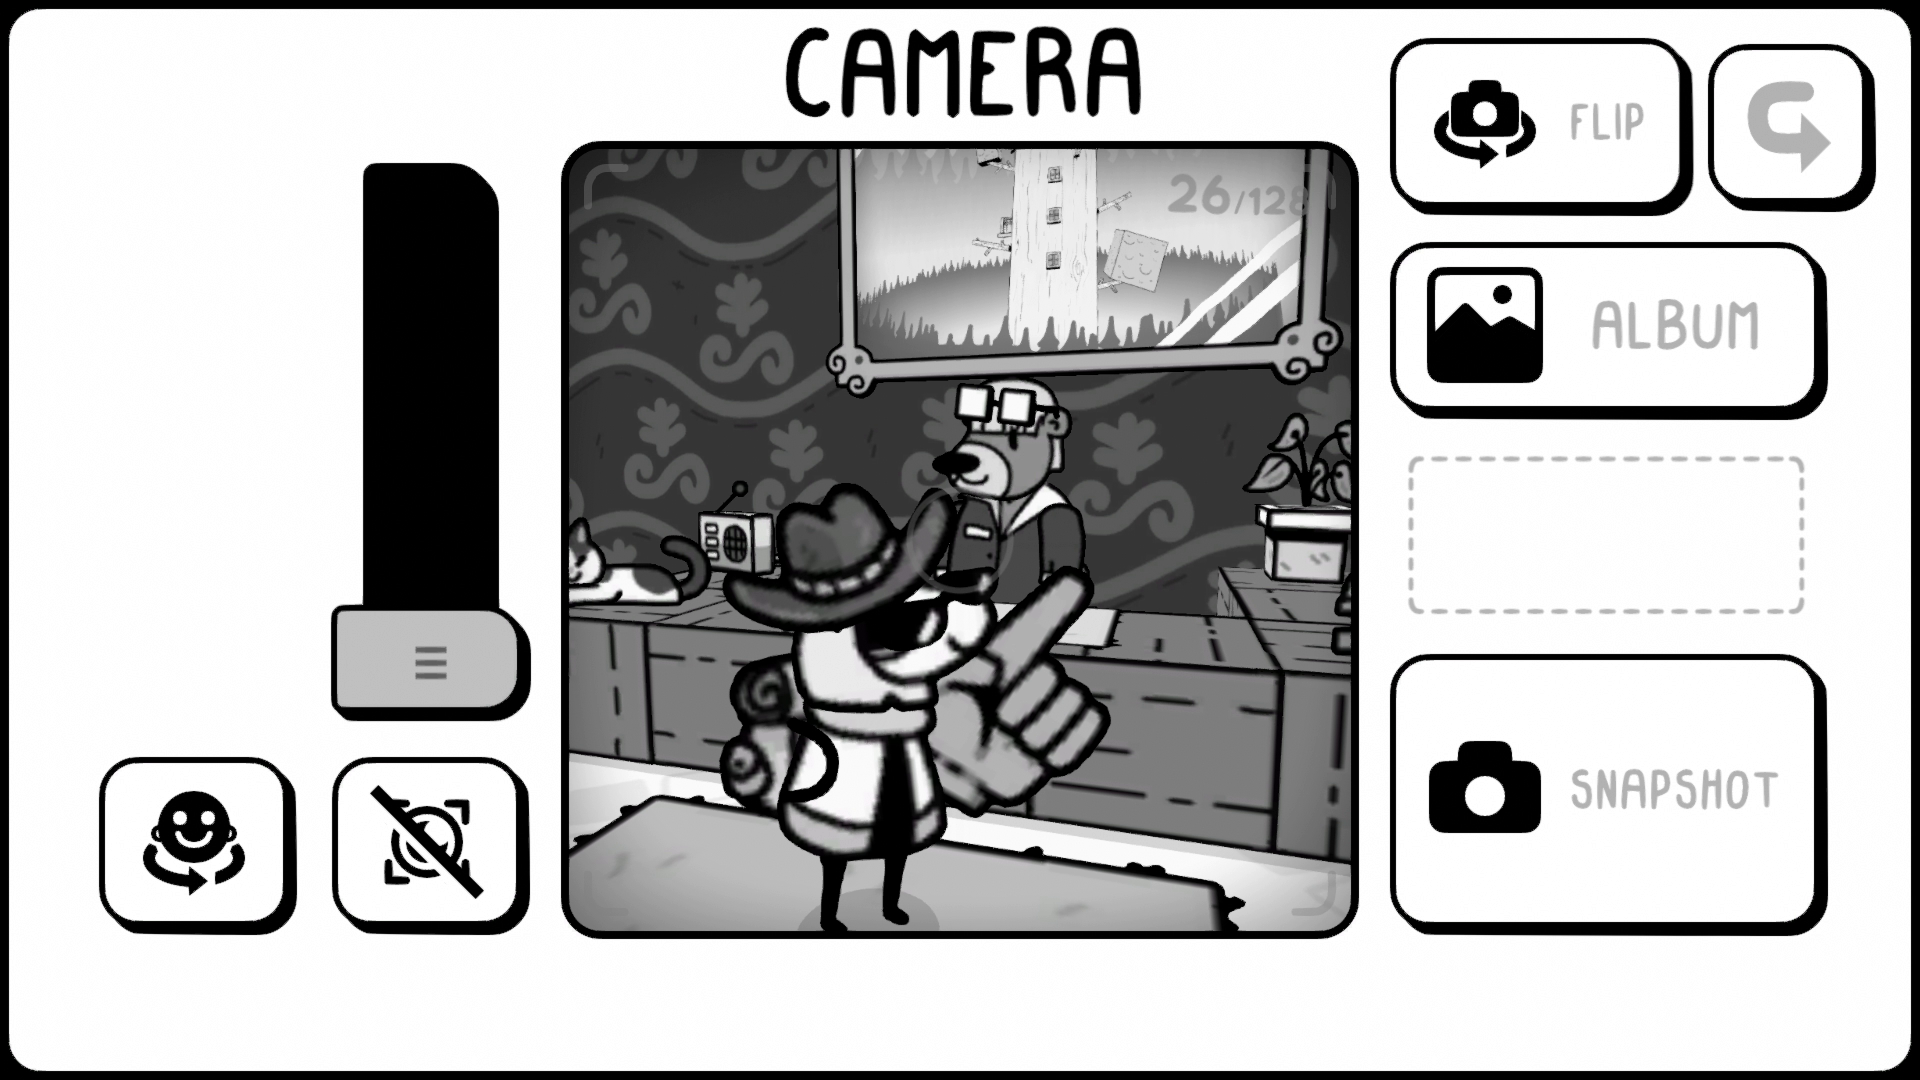 The protagonist from TOEM taking a photo using the camera interface. They're in front of a hotel reception desk wearing a cowboy hat, sunglasses, and a big foam finger